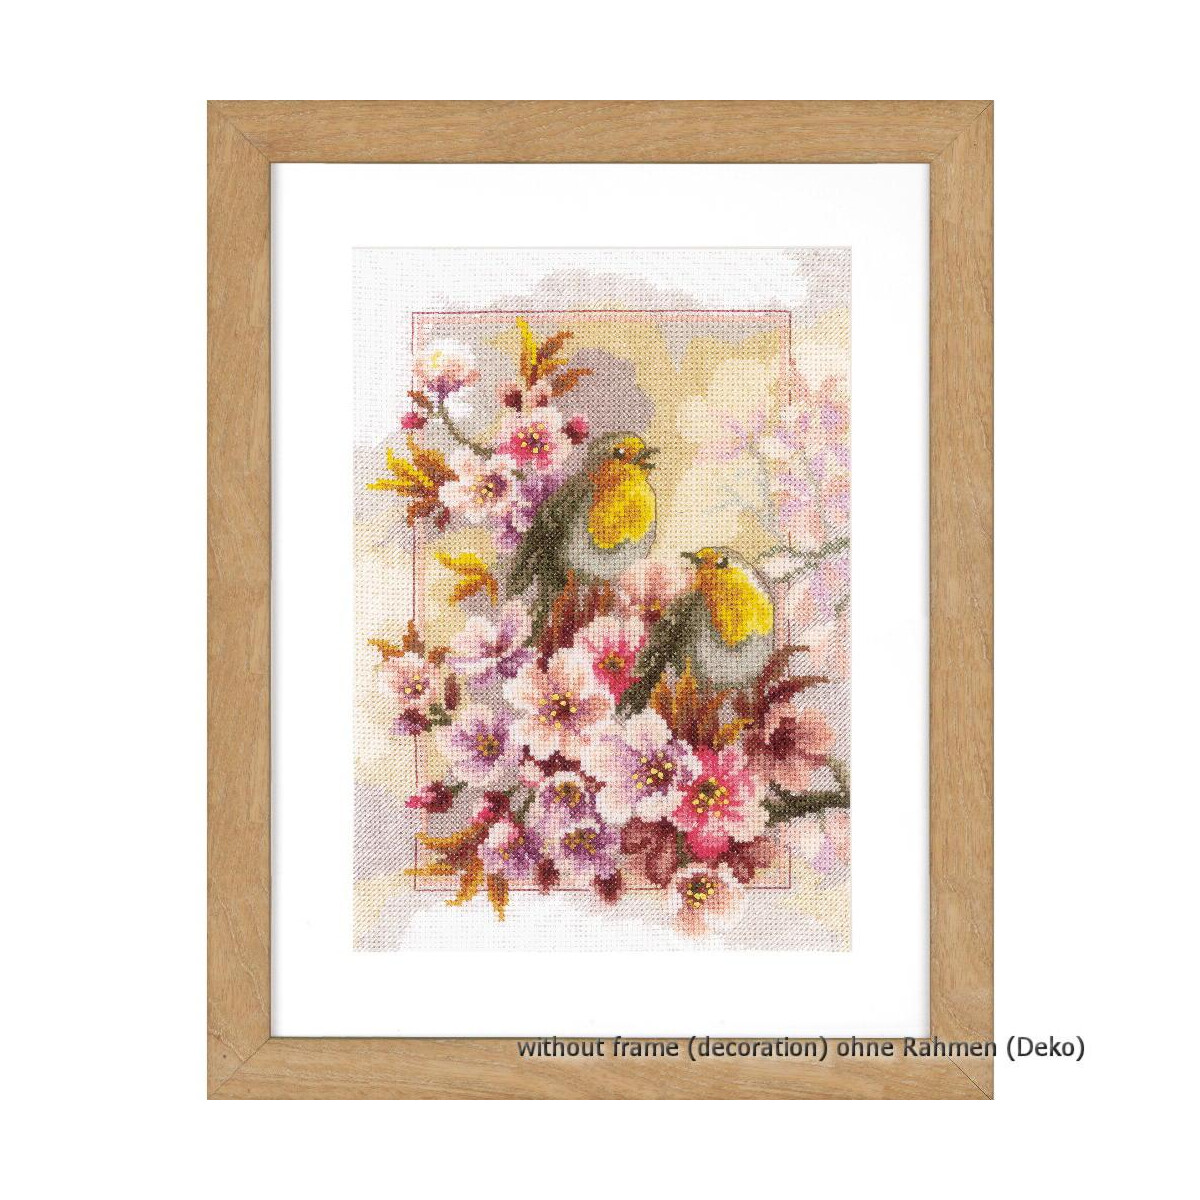 Vervaco counted cross stitch kit Robins in flowers, DIY